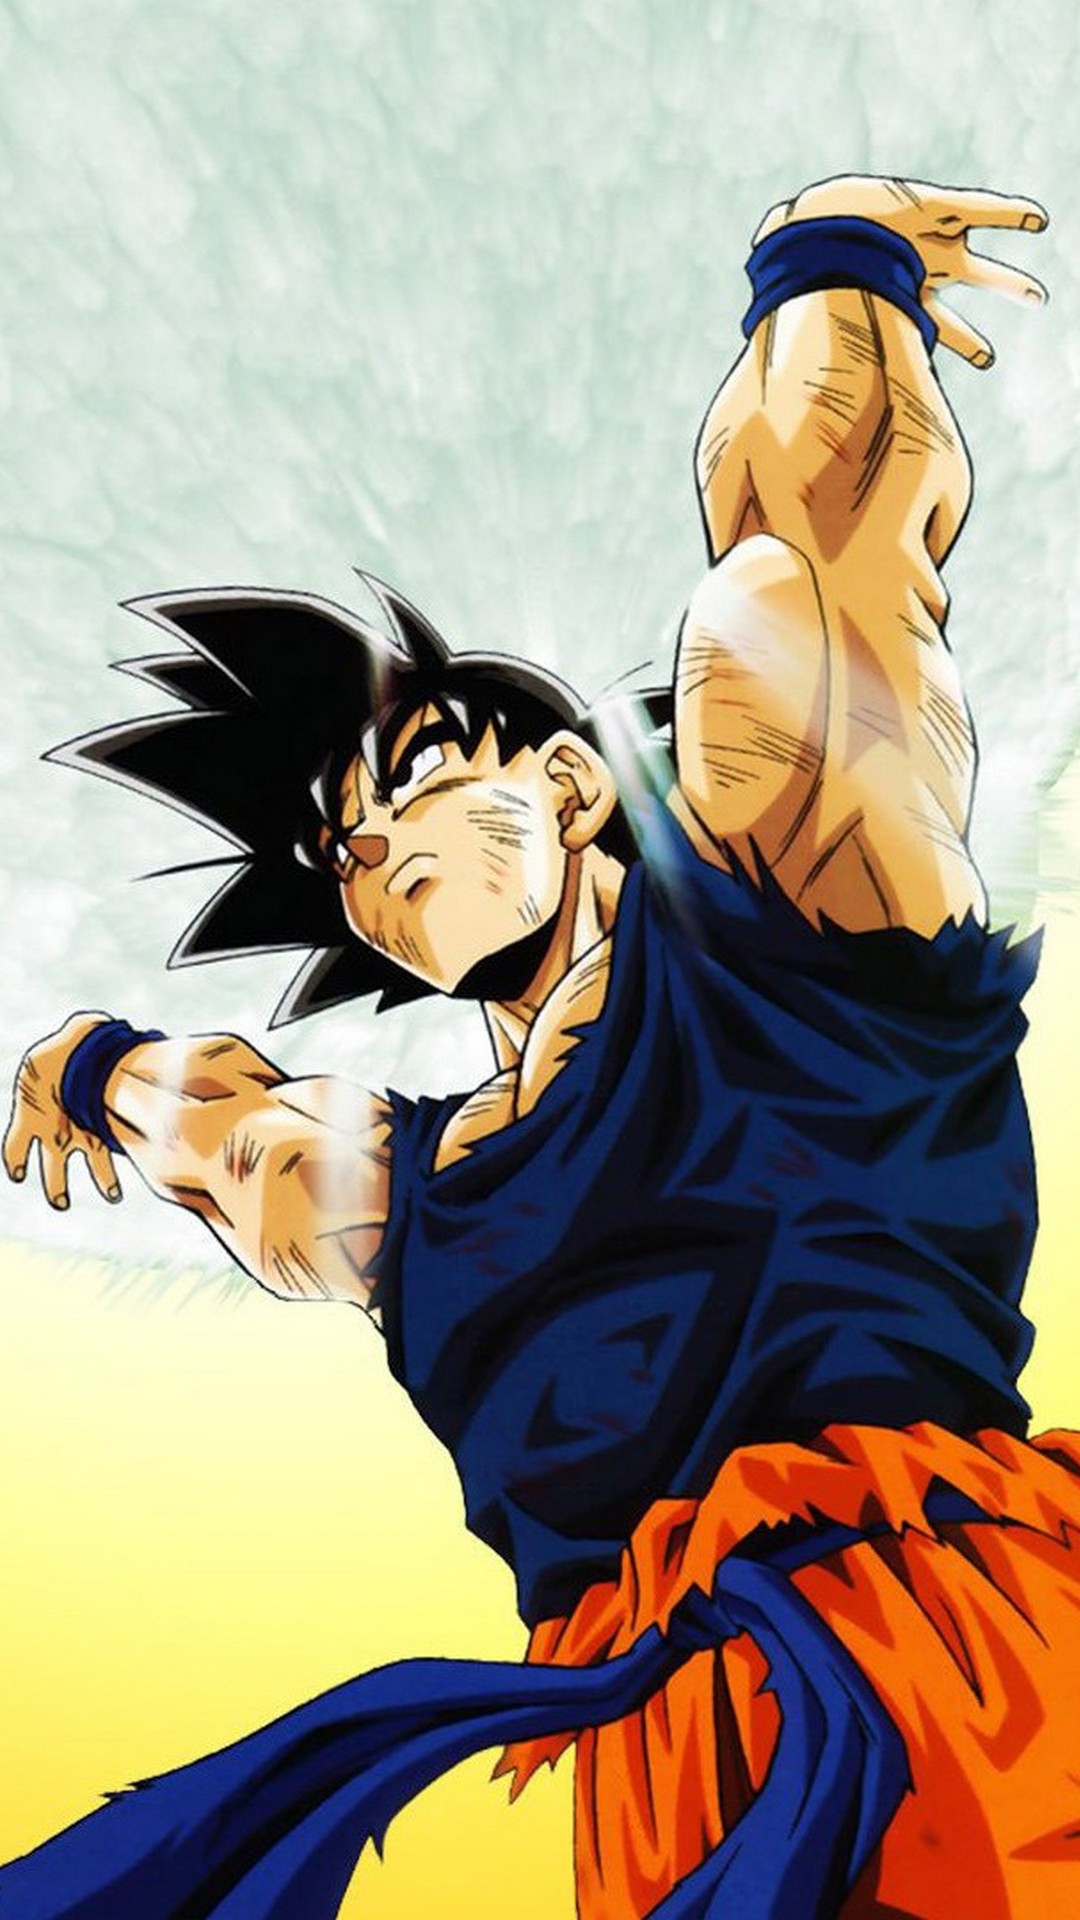 Goku Imagenes Wallpaper For iPhone with resolution 1080X1920 pixel. You can make this wallpaper for your iPhone 5, 6, 7, 8, X backgrounds, Mobile Screensaver, or iPad Lock Screen